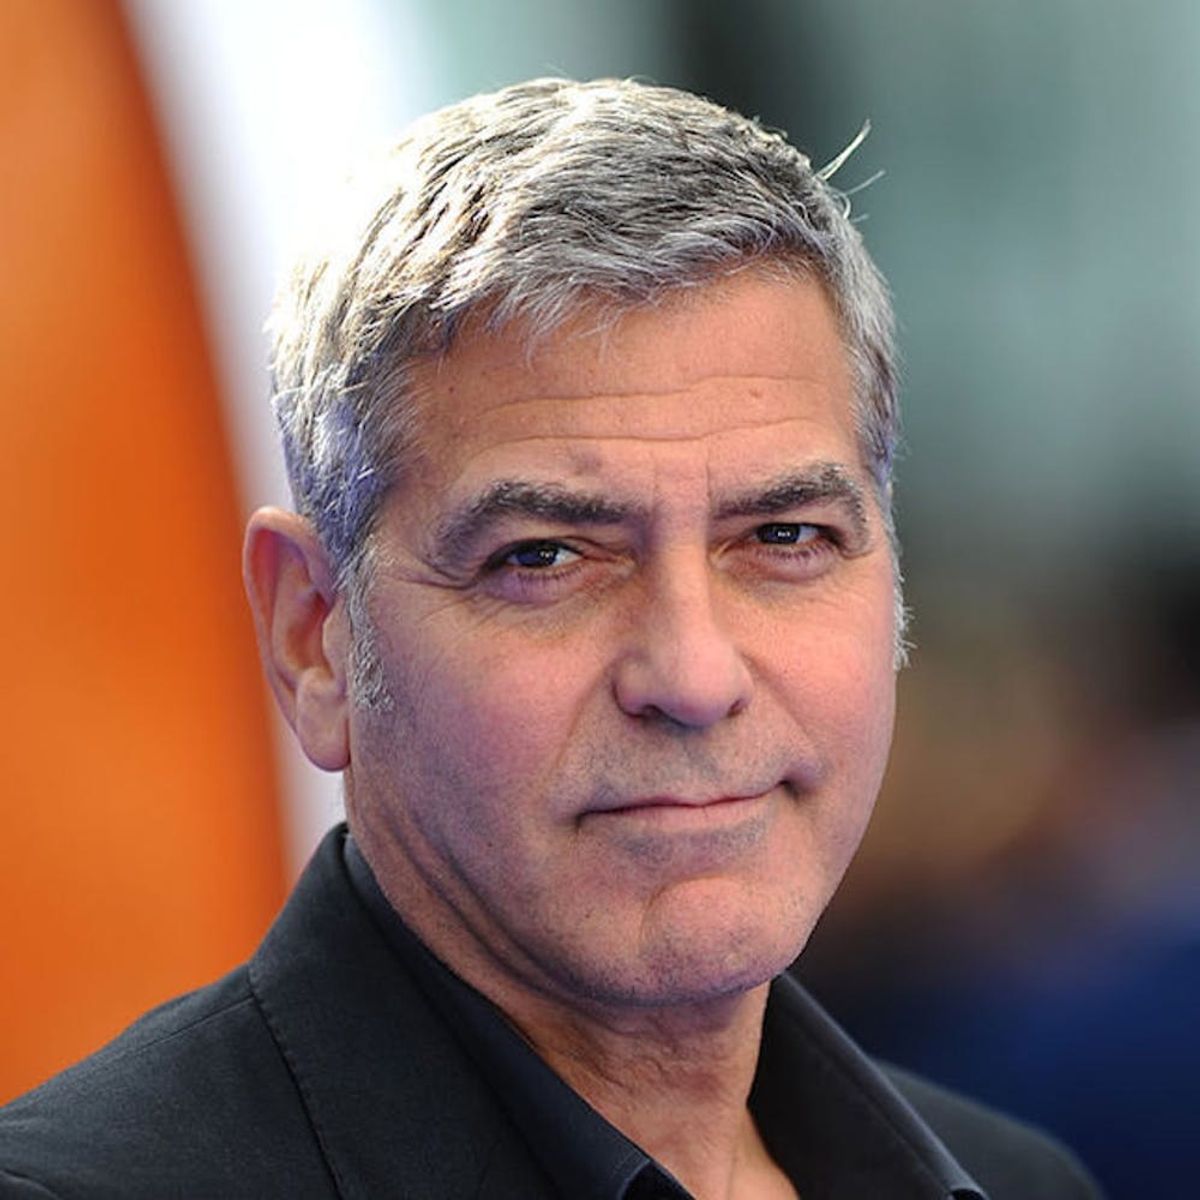 Morning Buzz! Watch the Exact Moment George Clooney Was Shocked With the News of Brad Pitt and Angelina Jolie’s Split